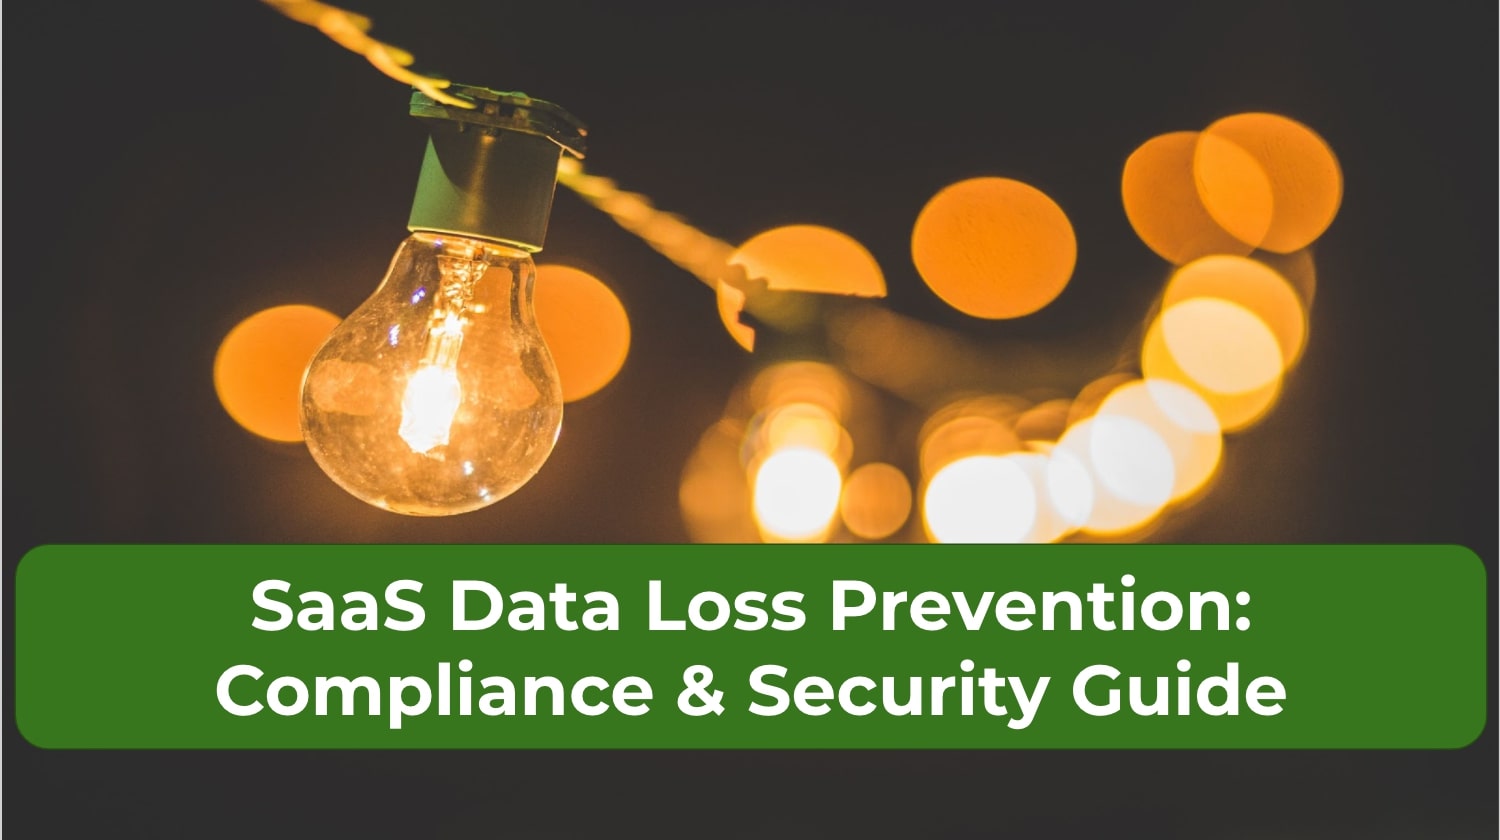 SaaS Data Loss Prevention: Compliance & Security Guide